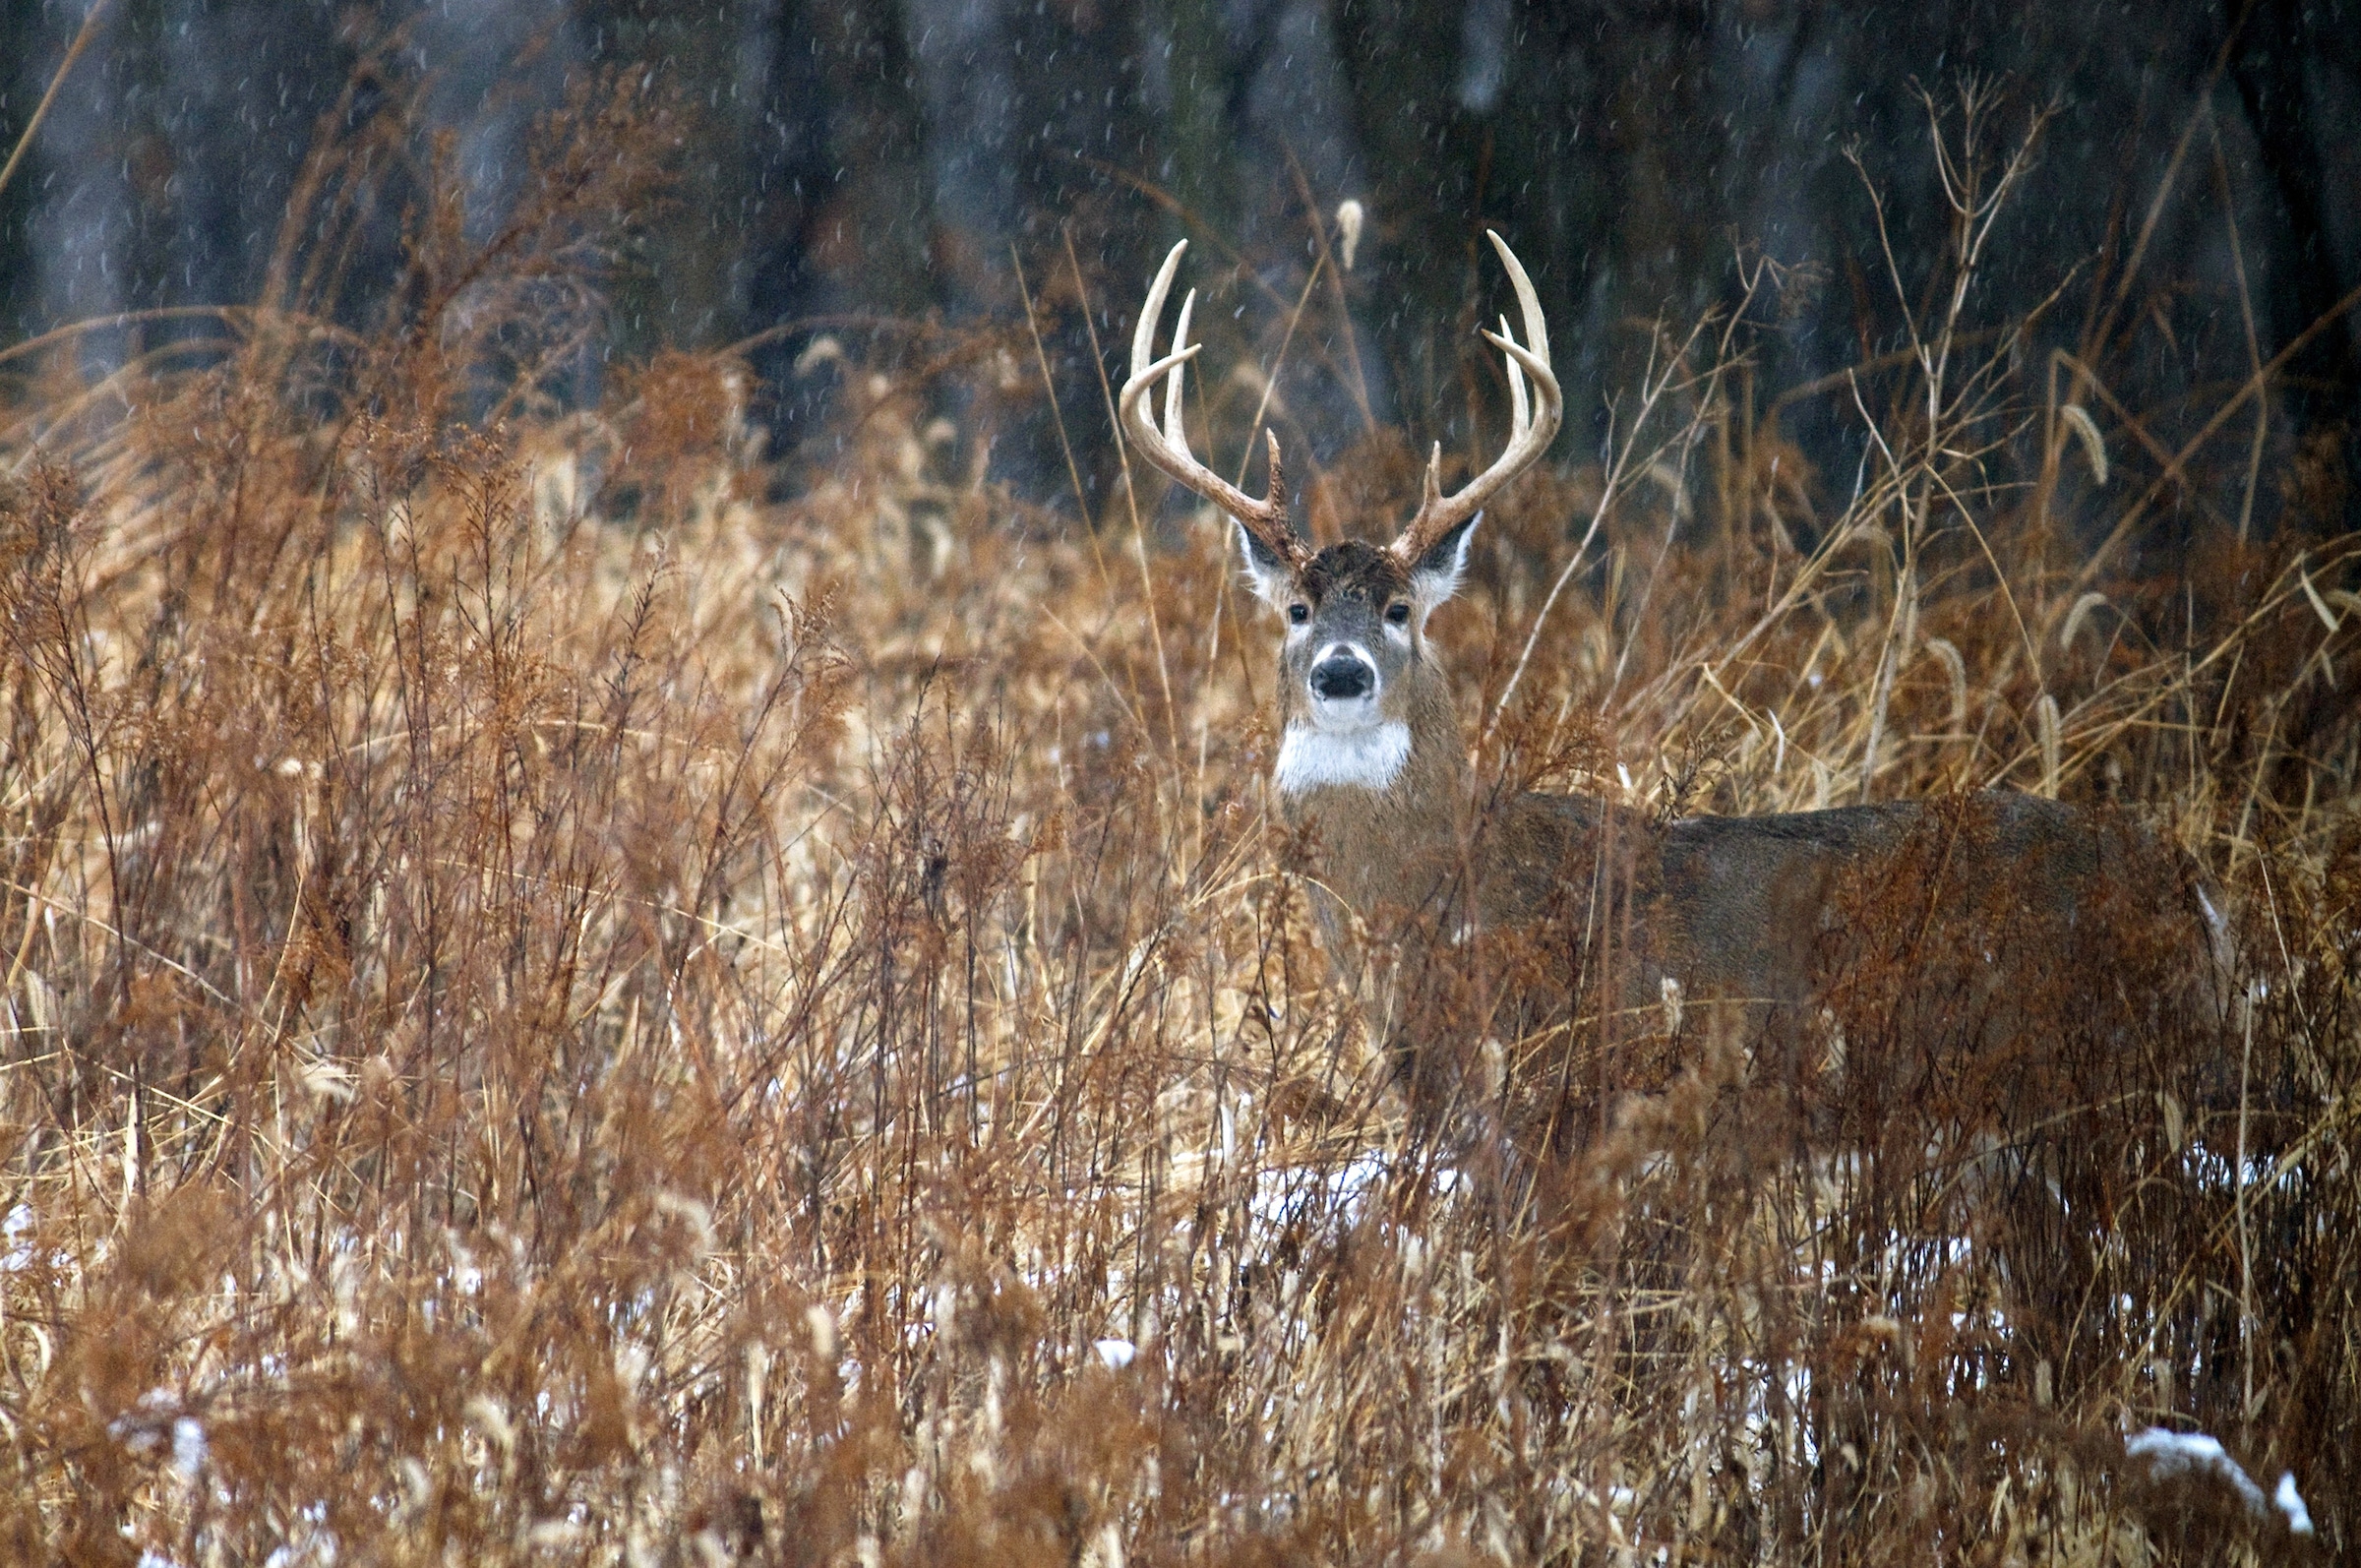 Growing a little bit of forage on your small property can improve your hunting potential.